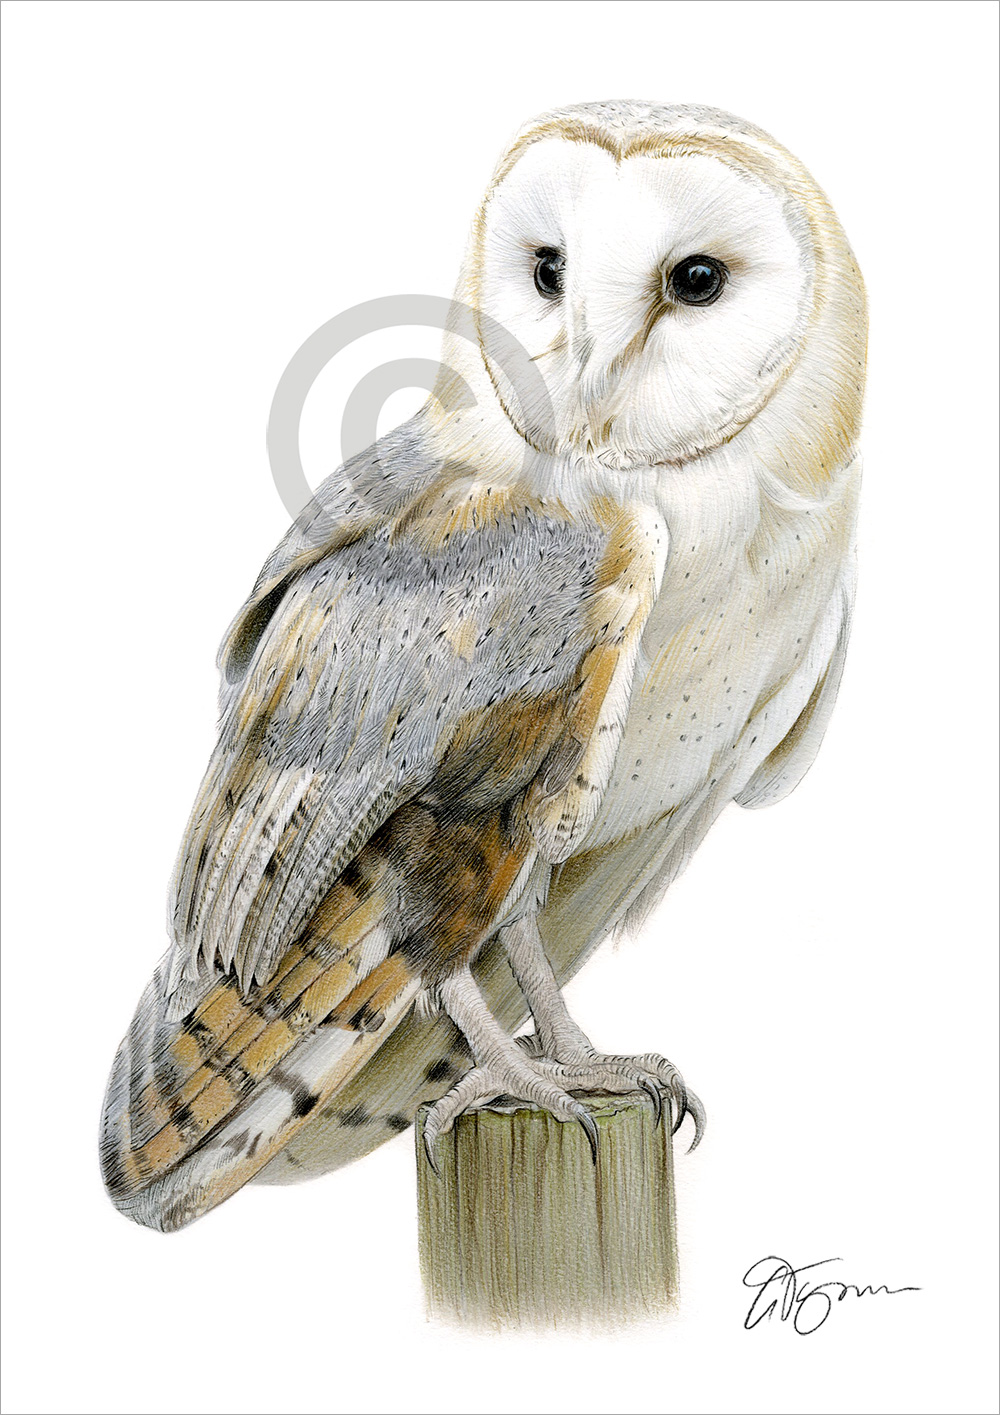 Colour pencil drawing of a barn owl by UK artist Gary Tymon